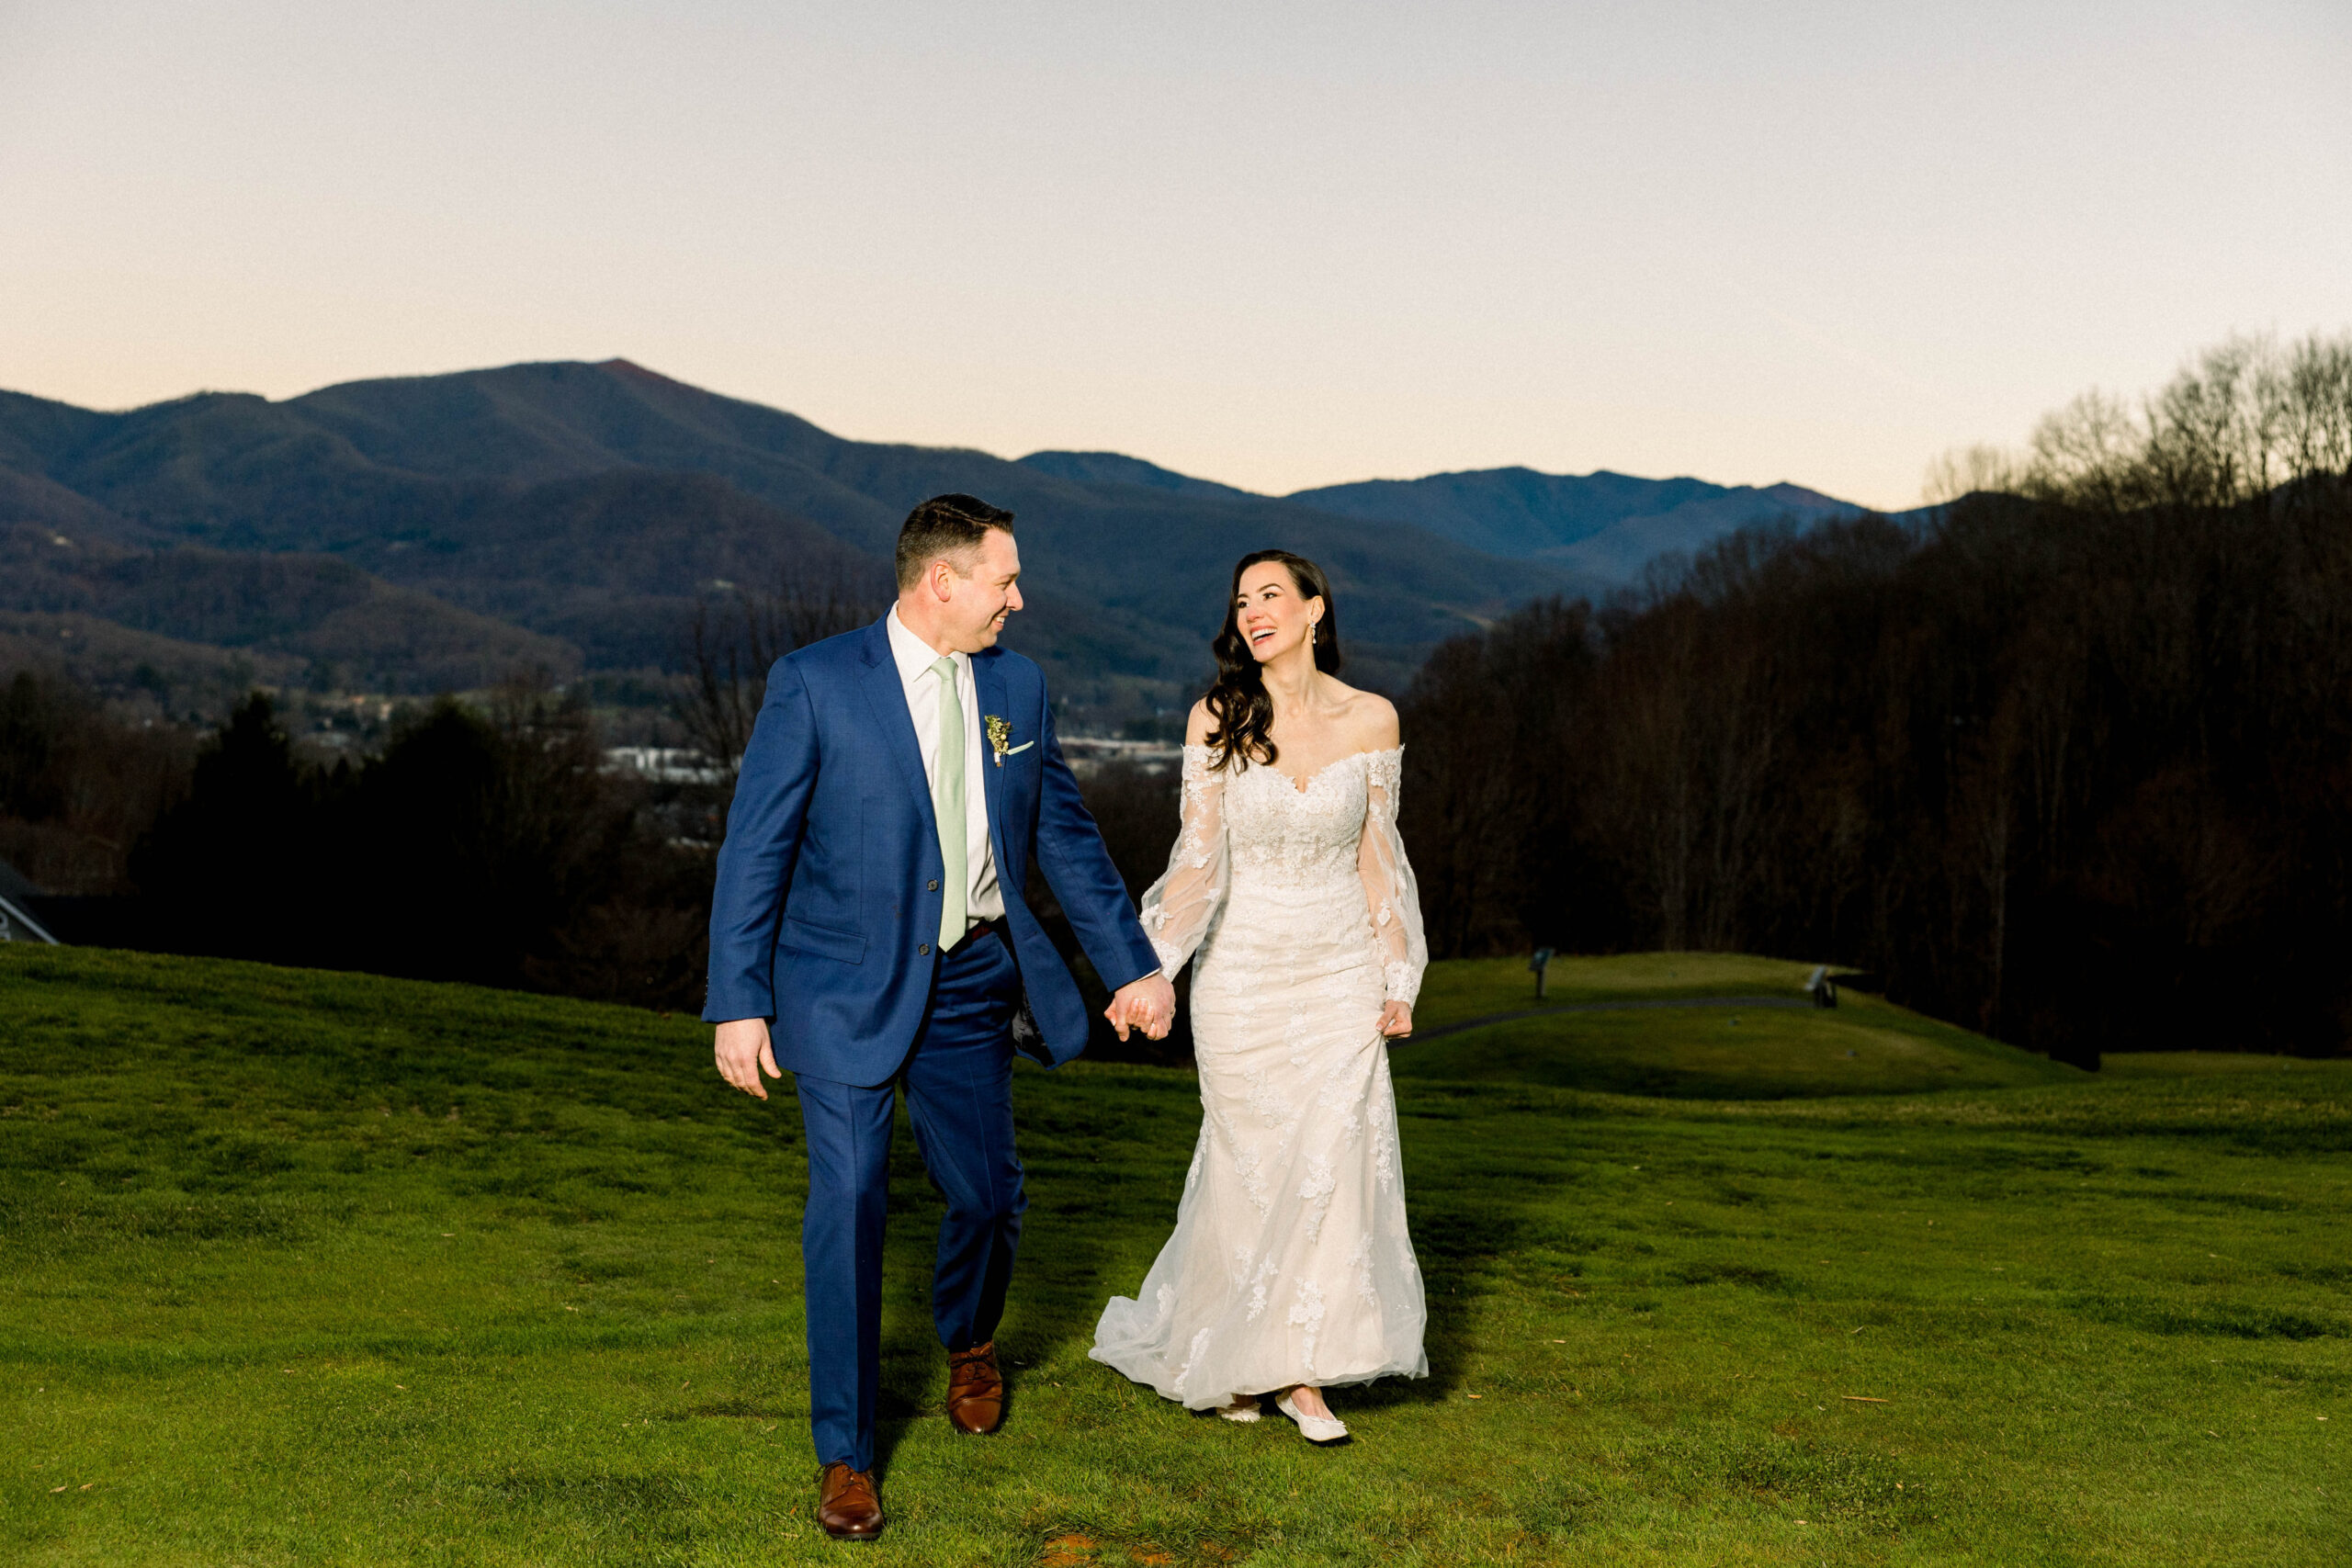 bride in white dress and groom in blue suit in front of mountains at sunset